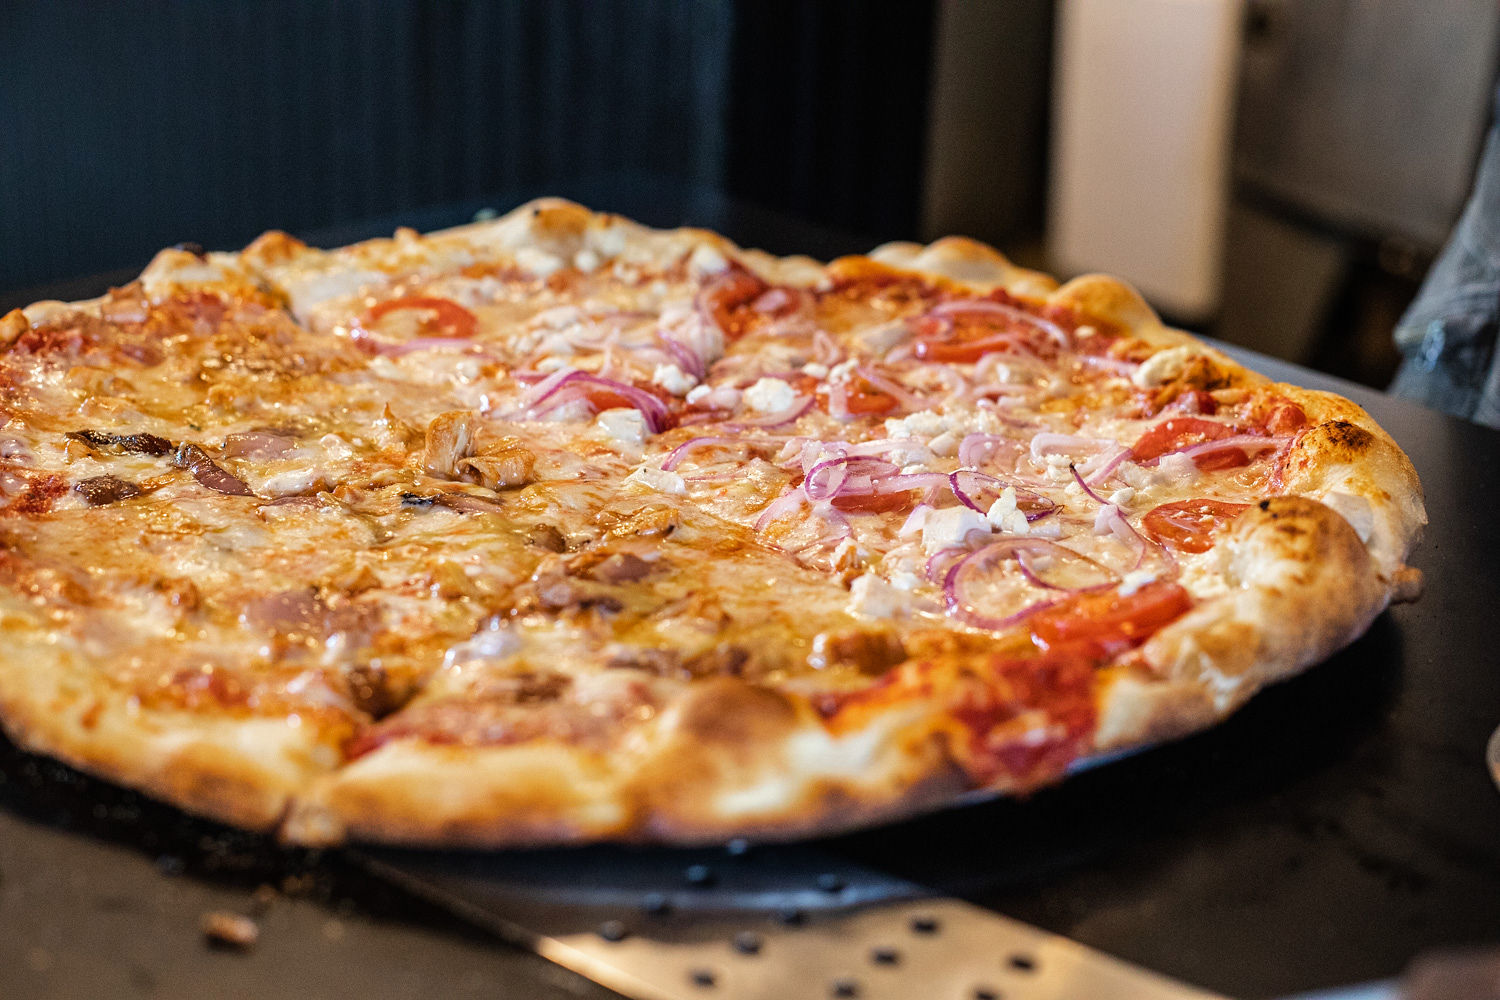 Pizza Places in Boise: 5 Things You Need to Look for